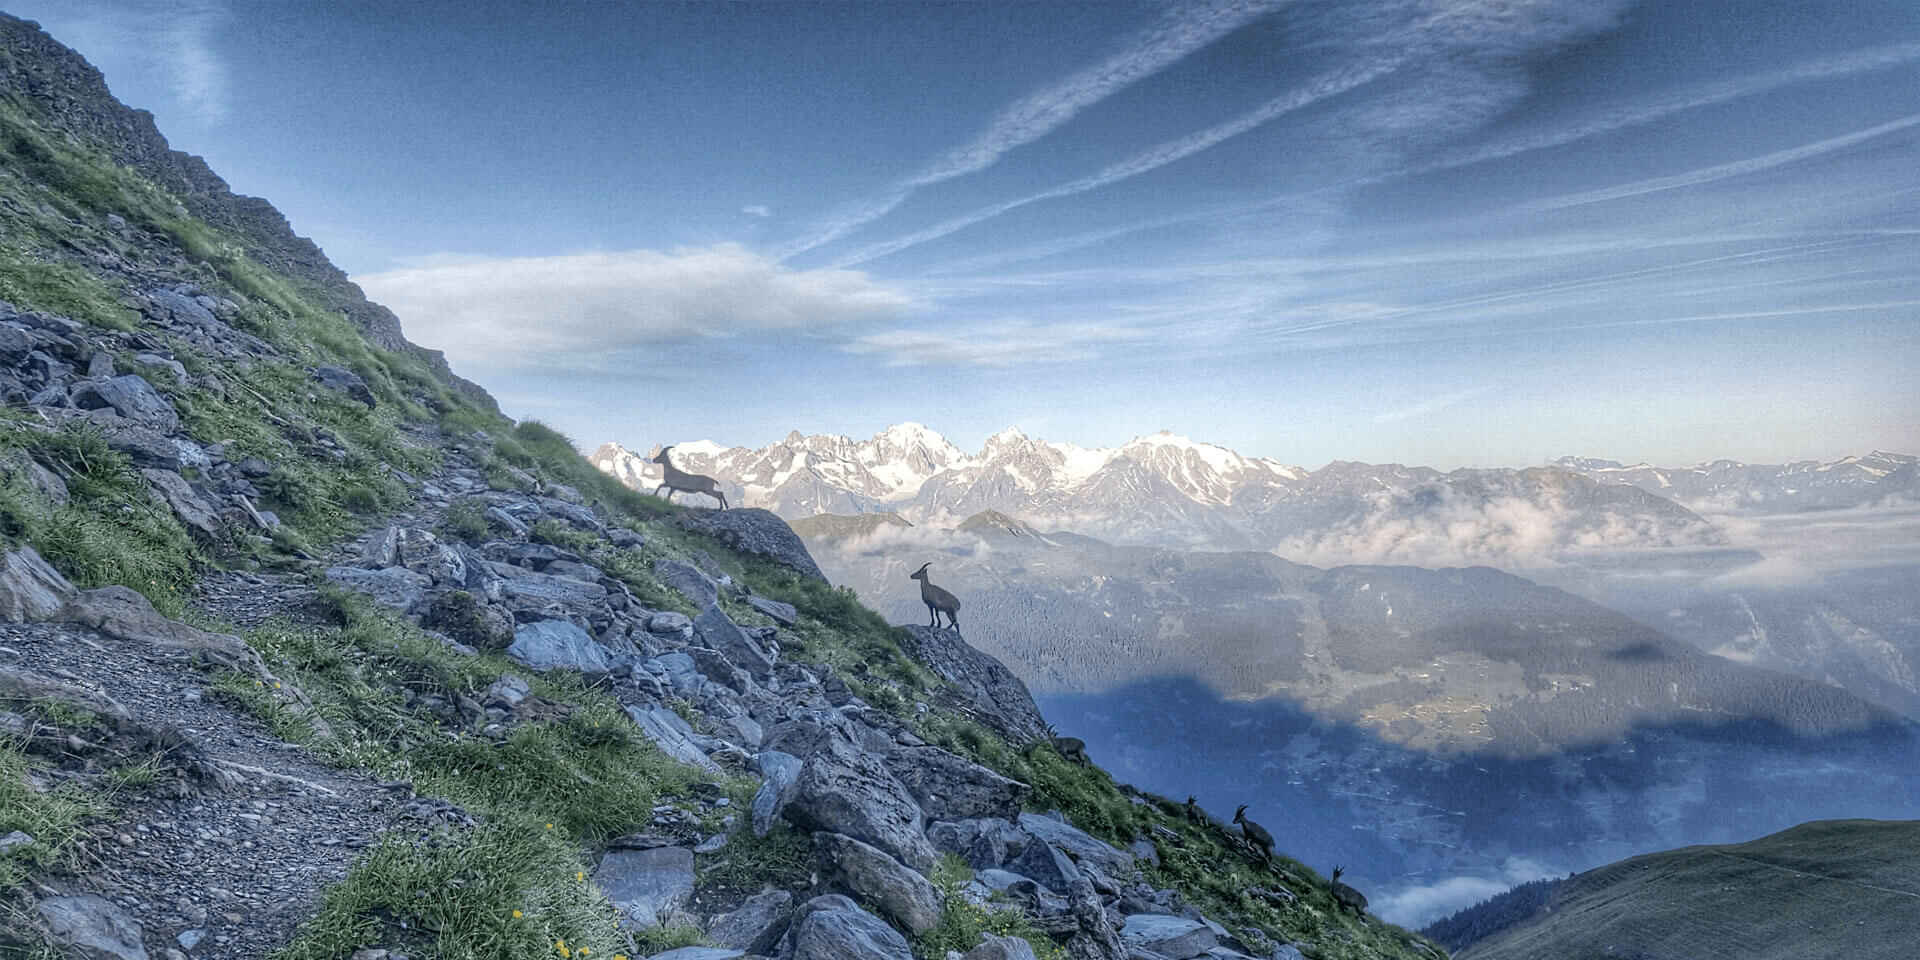 Ibex on the mountain side